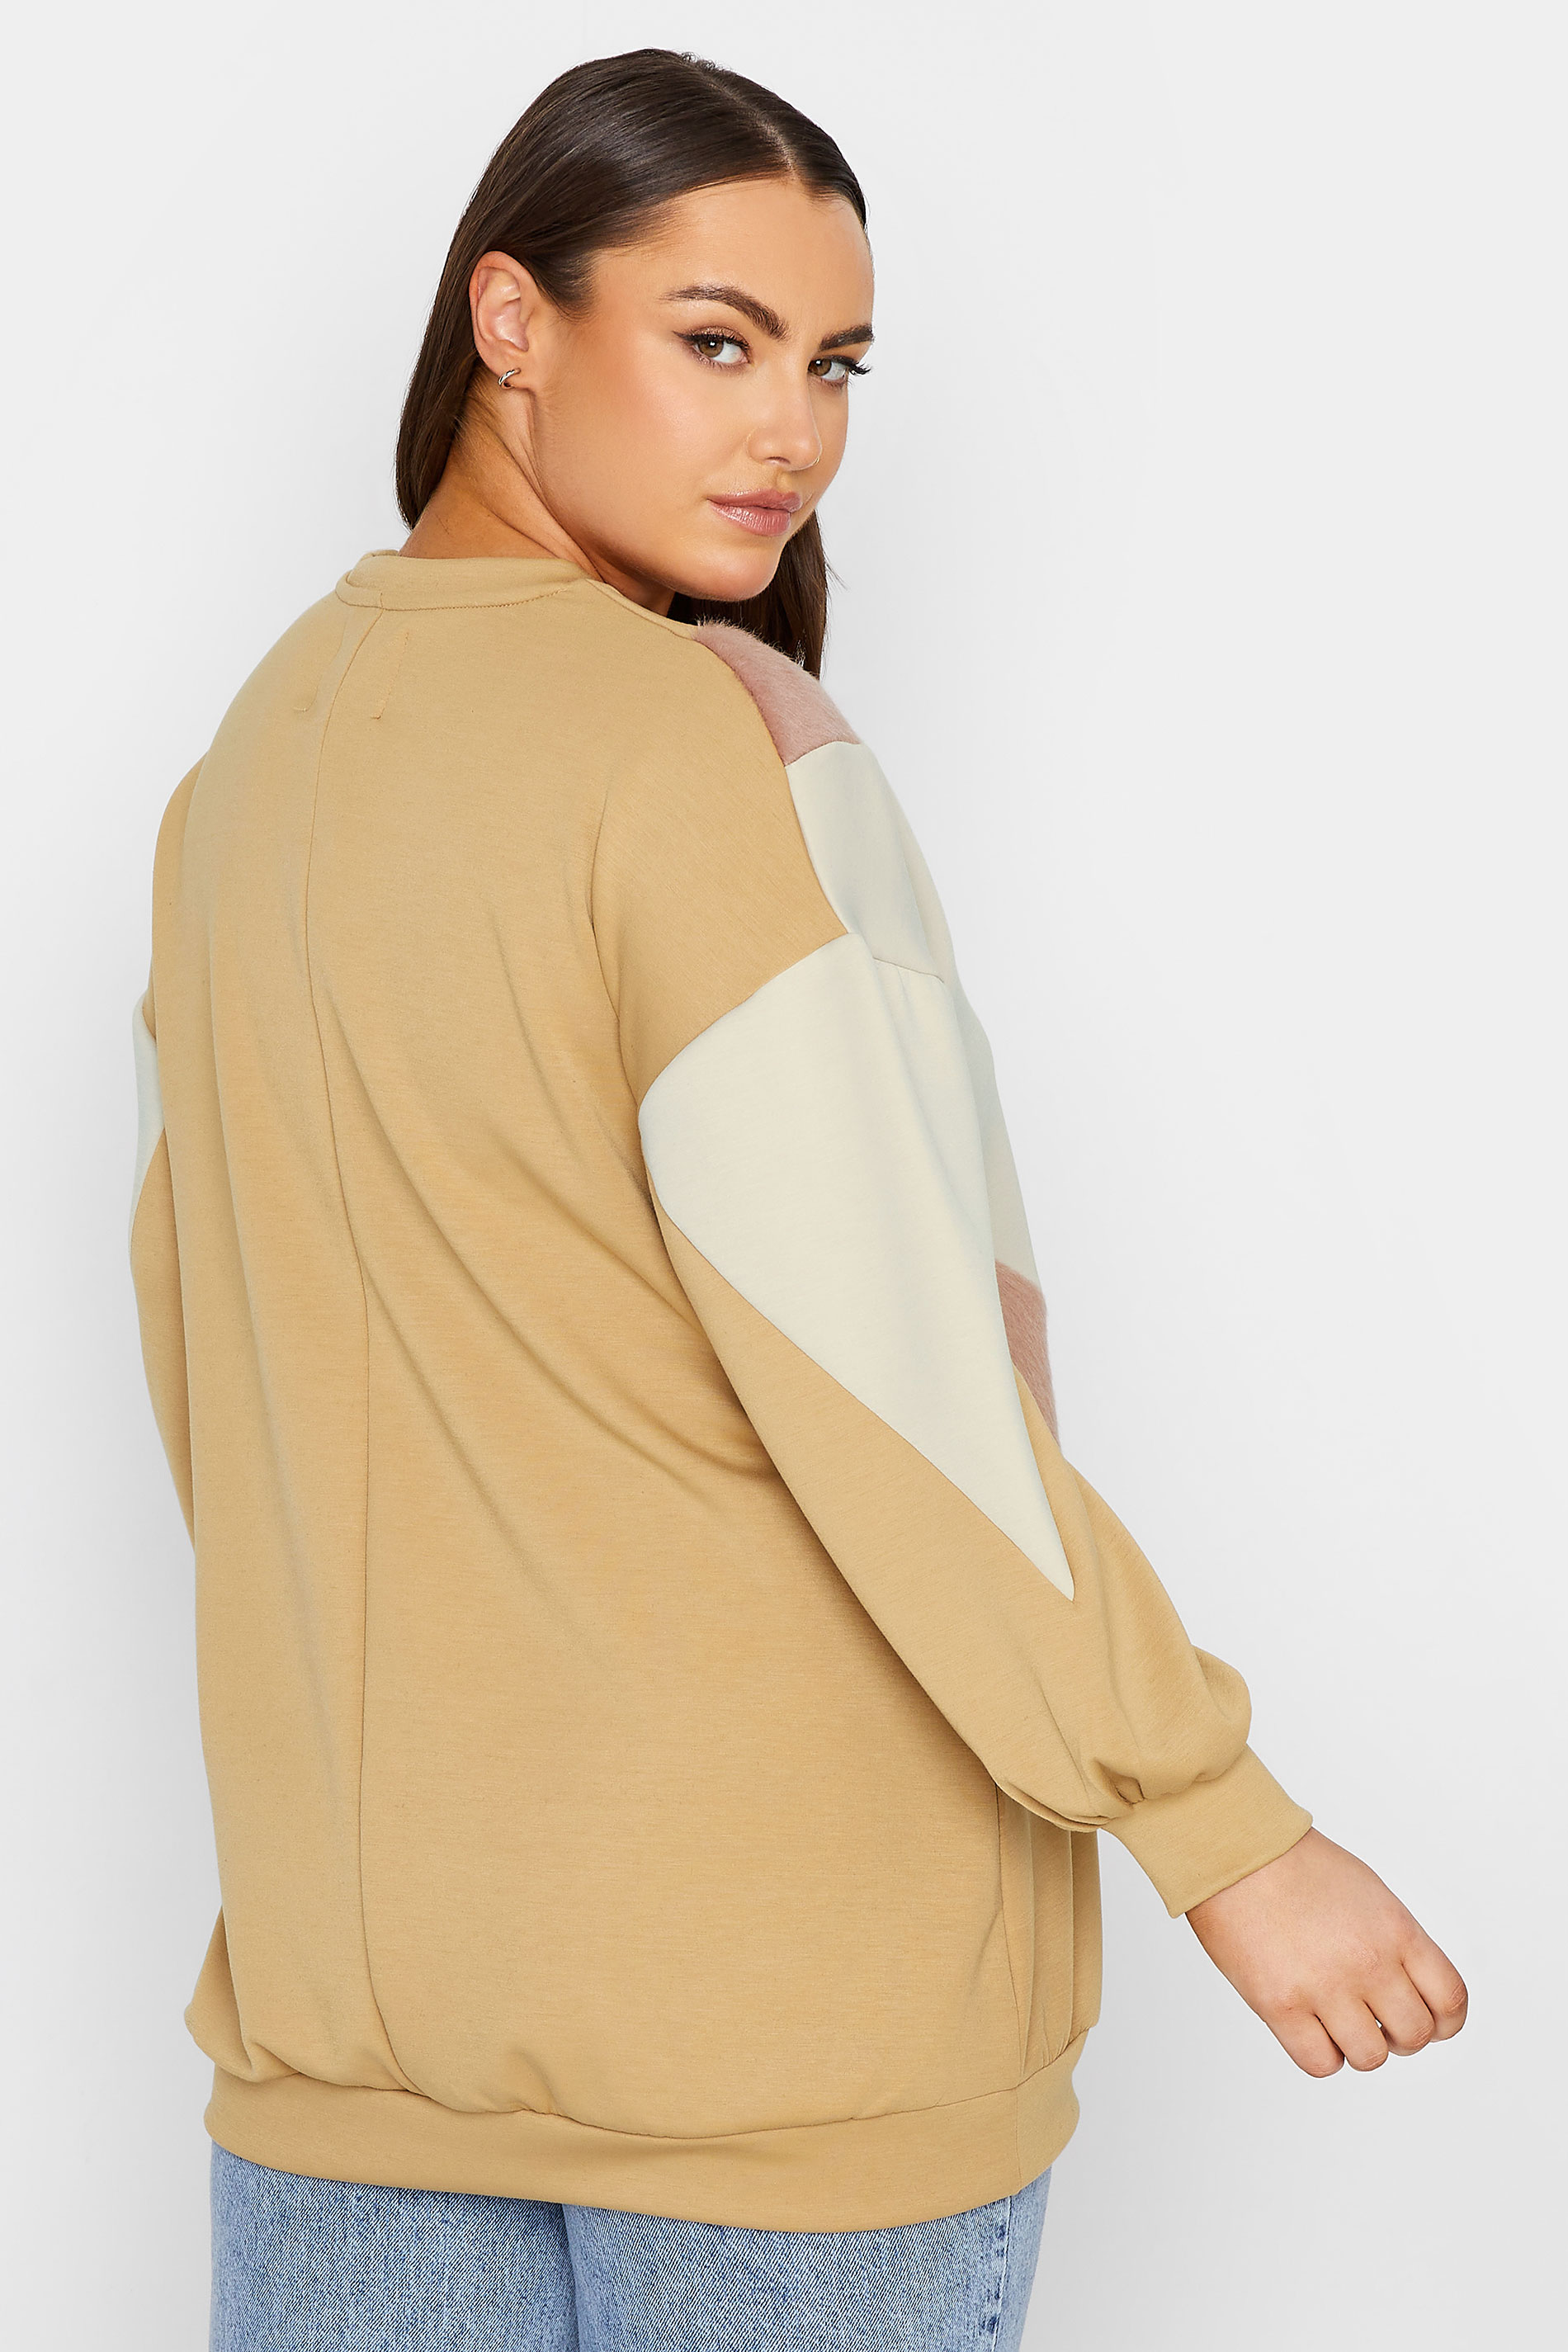 YOURS LUXURY Plus Size Natural Brown Faux Fur Chevron Sweatshirt | Yours Clothing 2